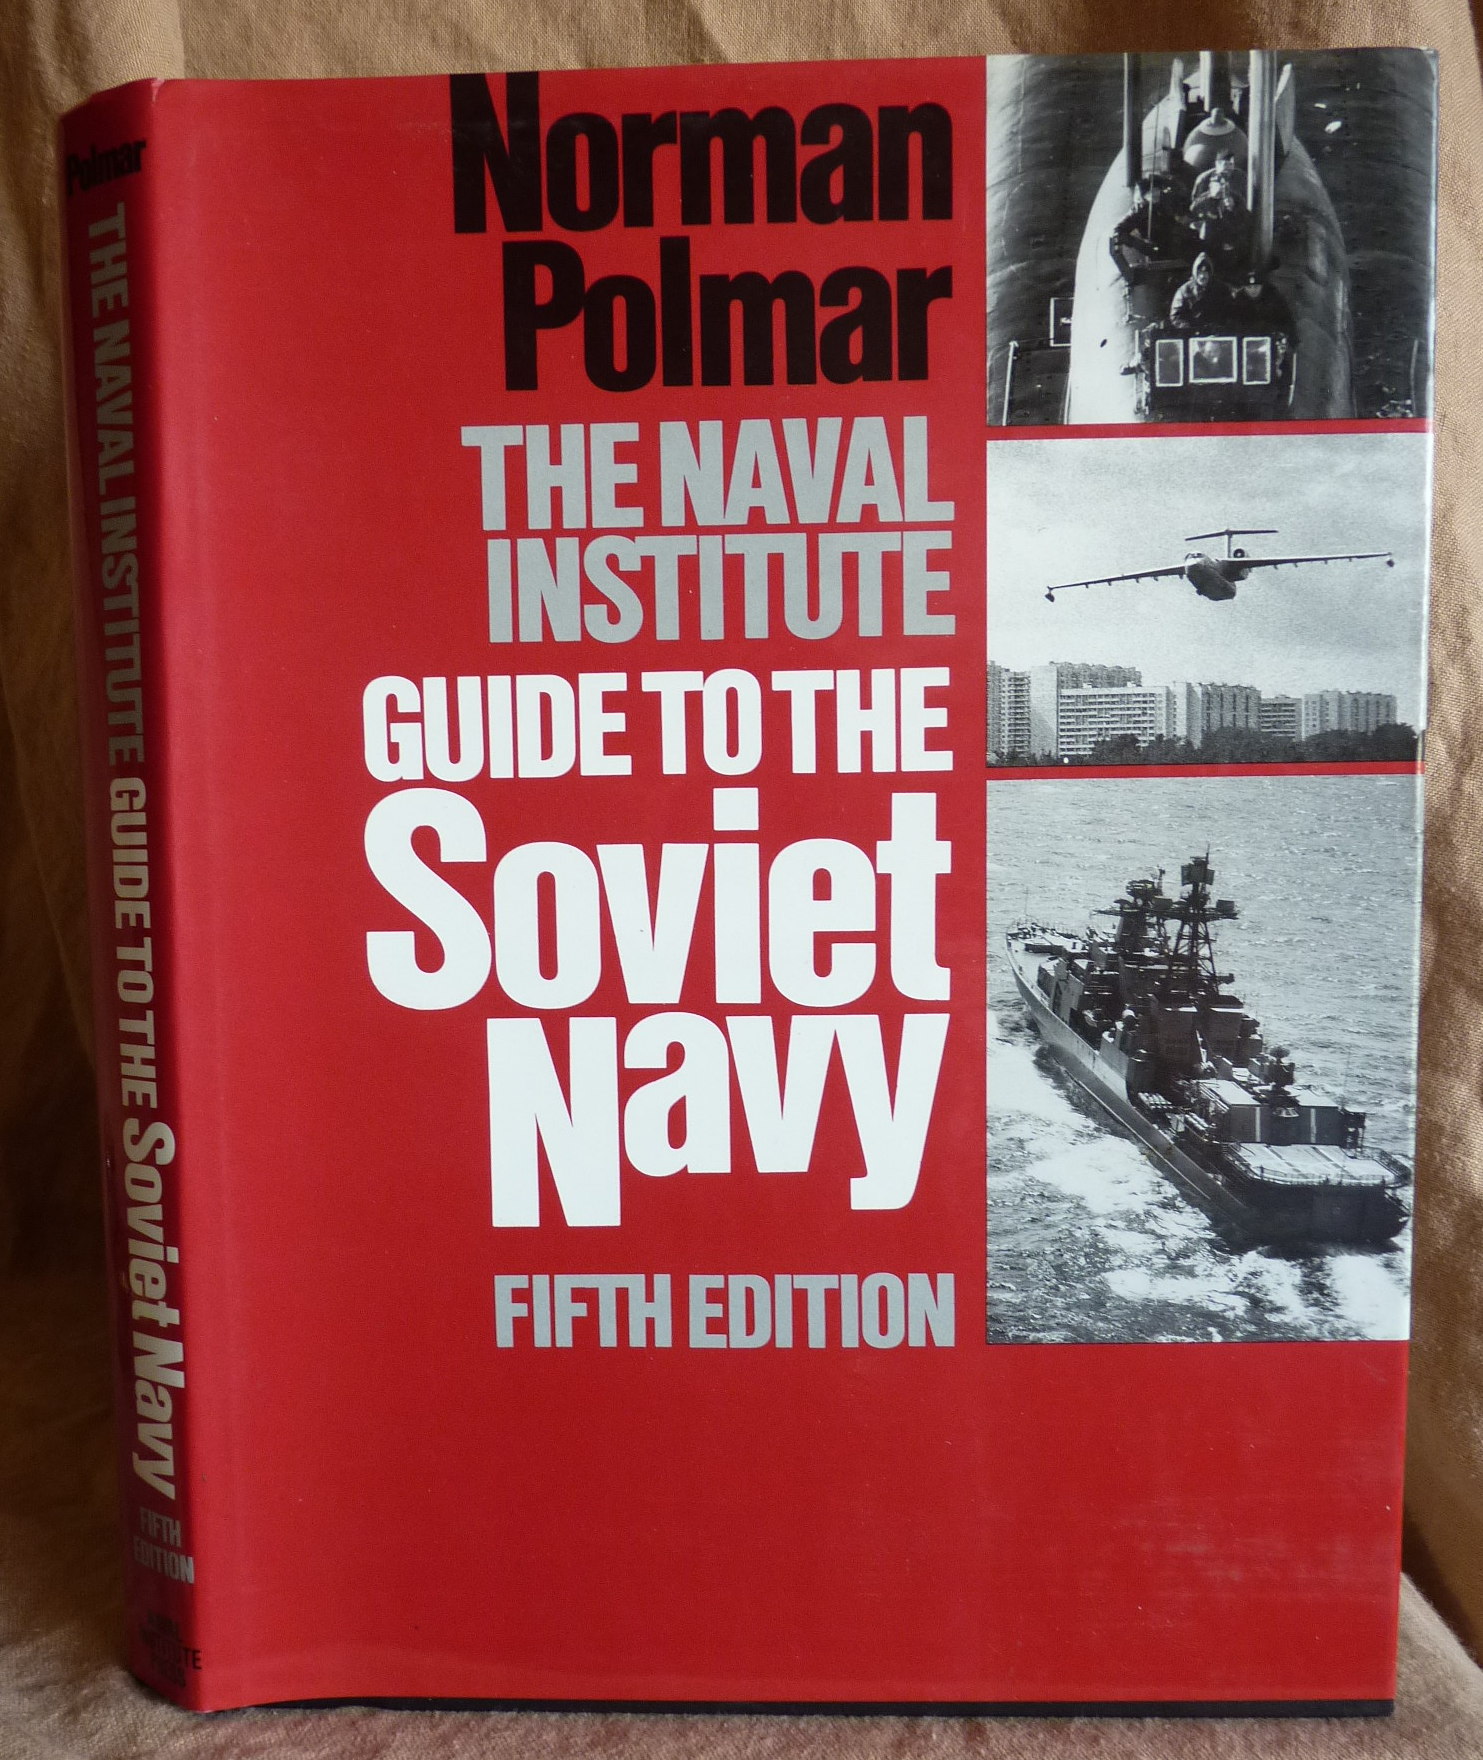 The Naval Institute Guide to the Soviet Navy Fifth Edition - Polmar, Norman